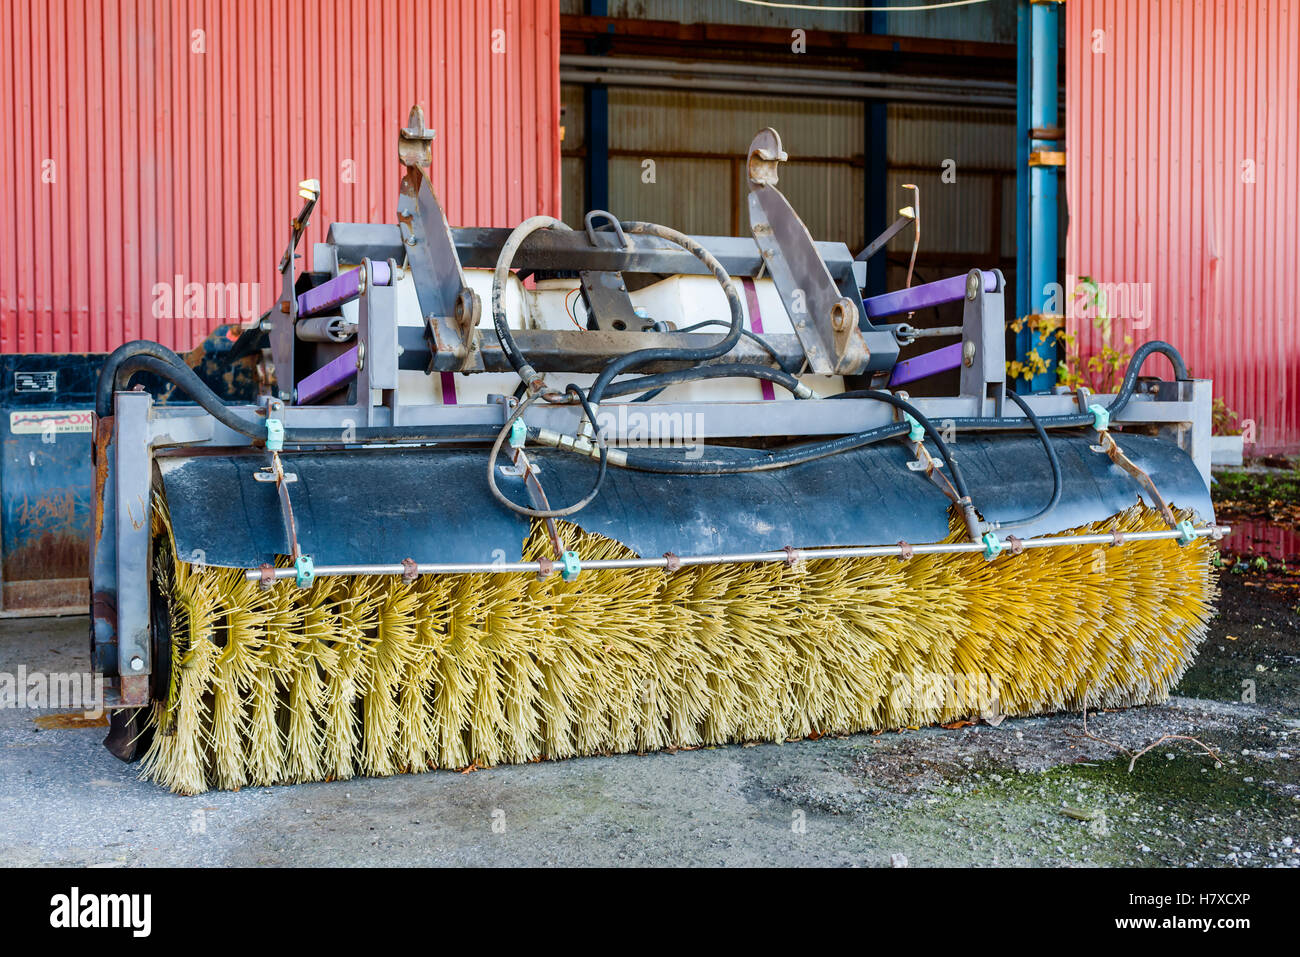 Brakne Hoby, Sweden - October 29, 2016: Documentary of public industrial area. Rotating road broom stored outside an open buildi Stock Photo